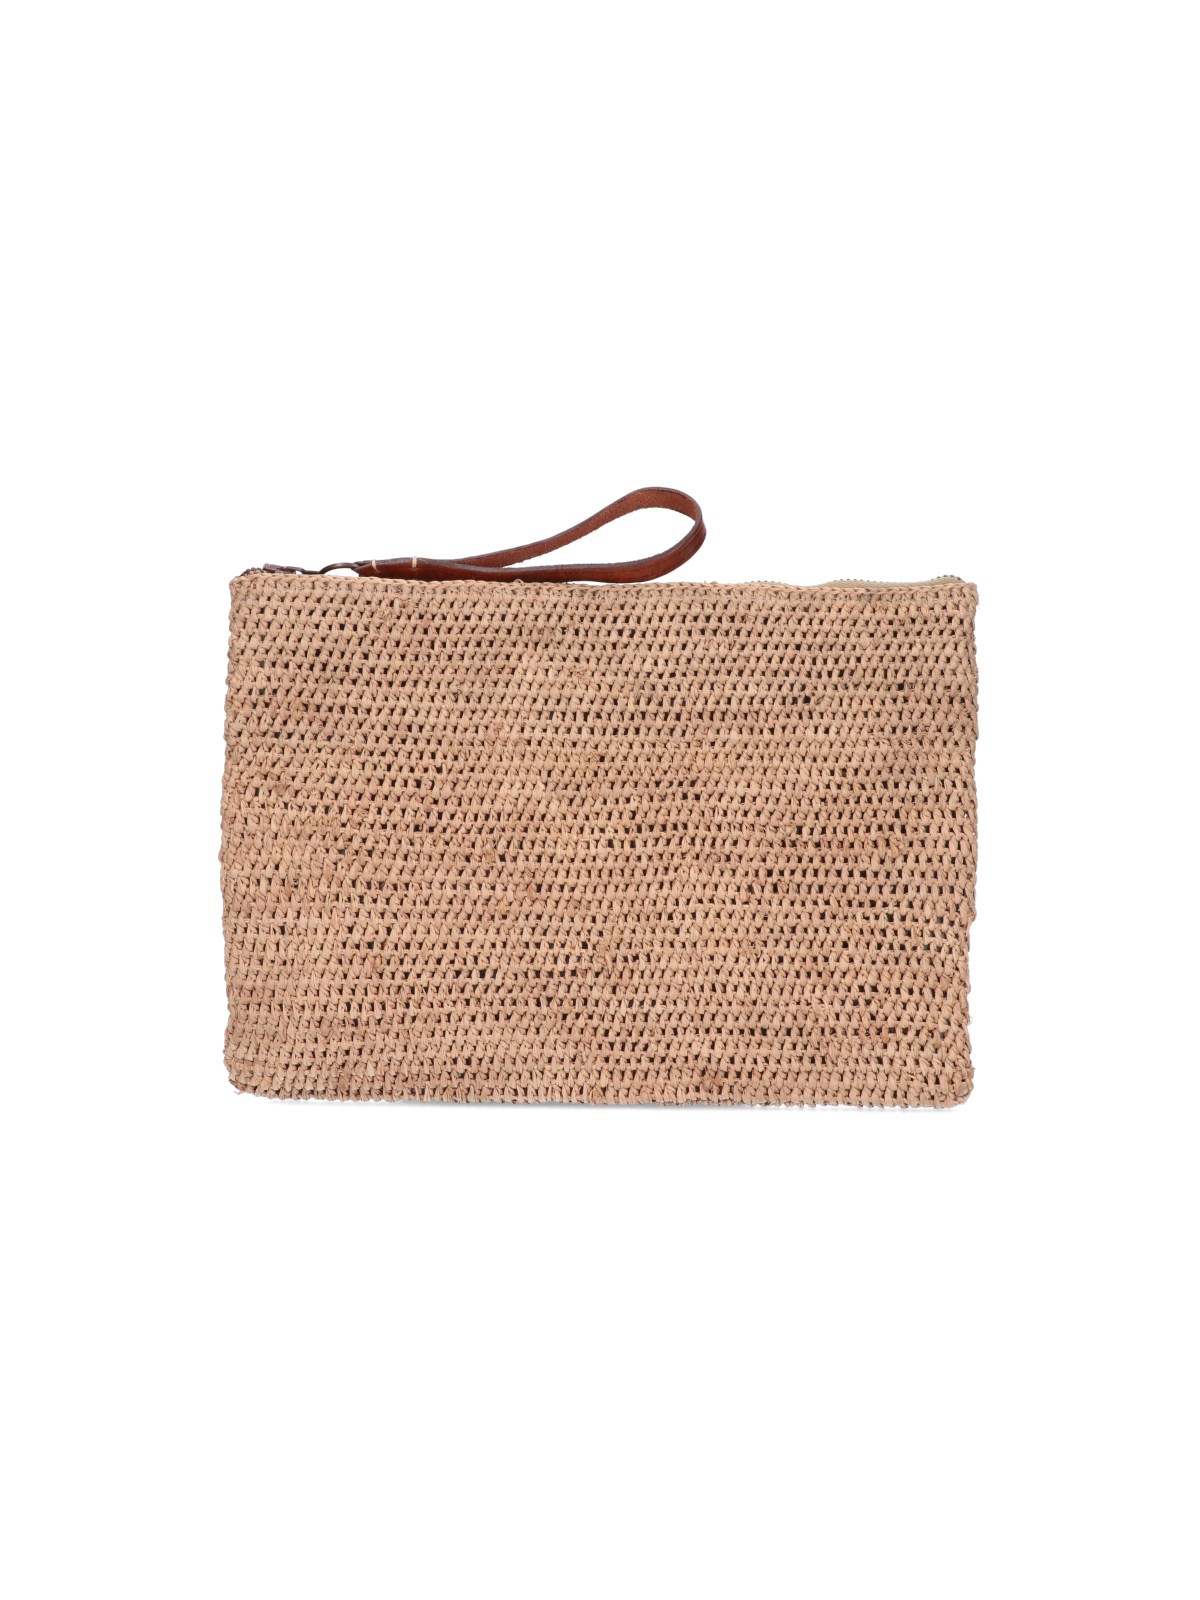 Ibeliv 'ampy' Pouch In Beige